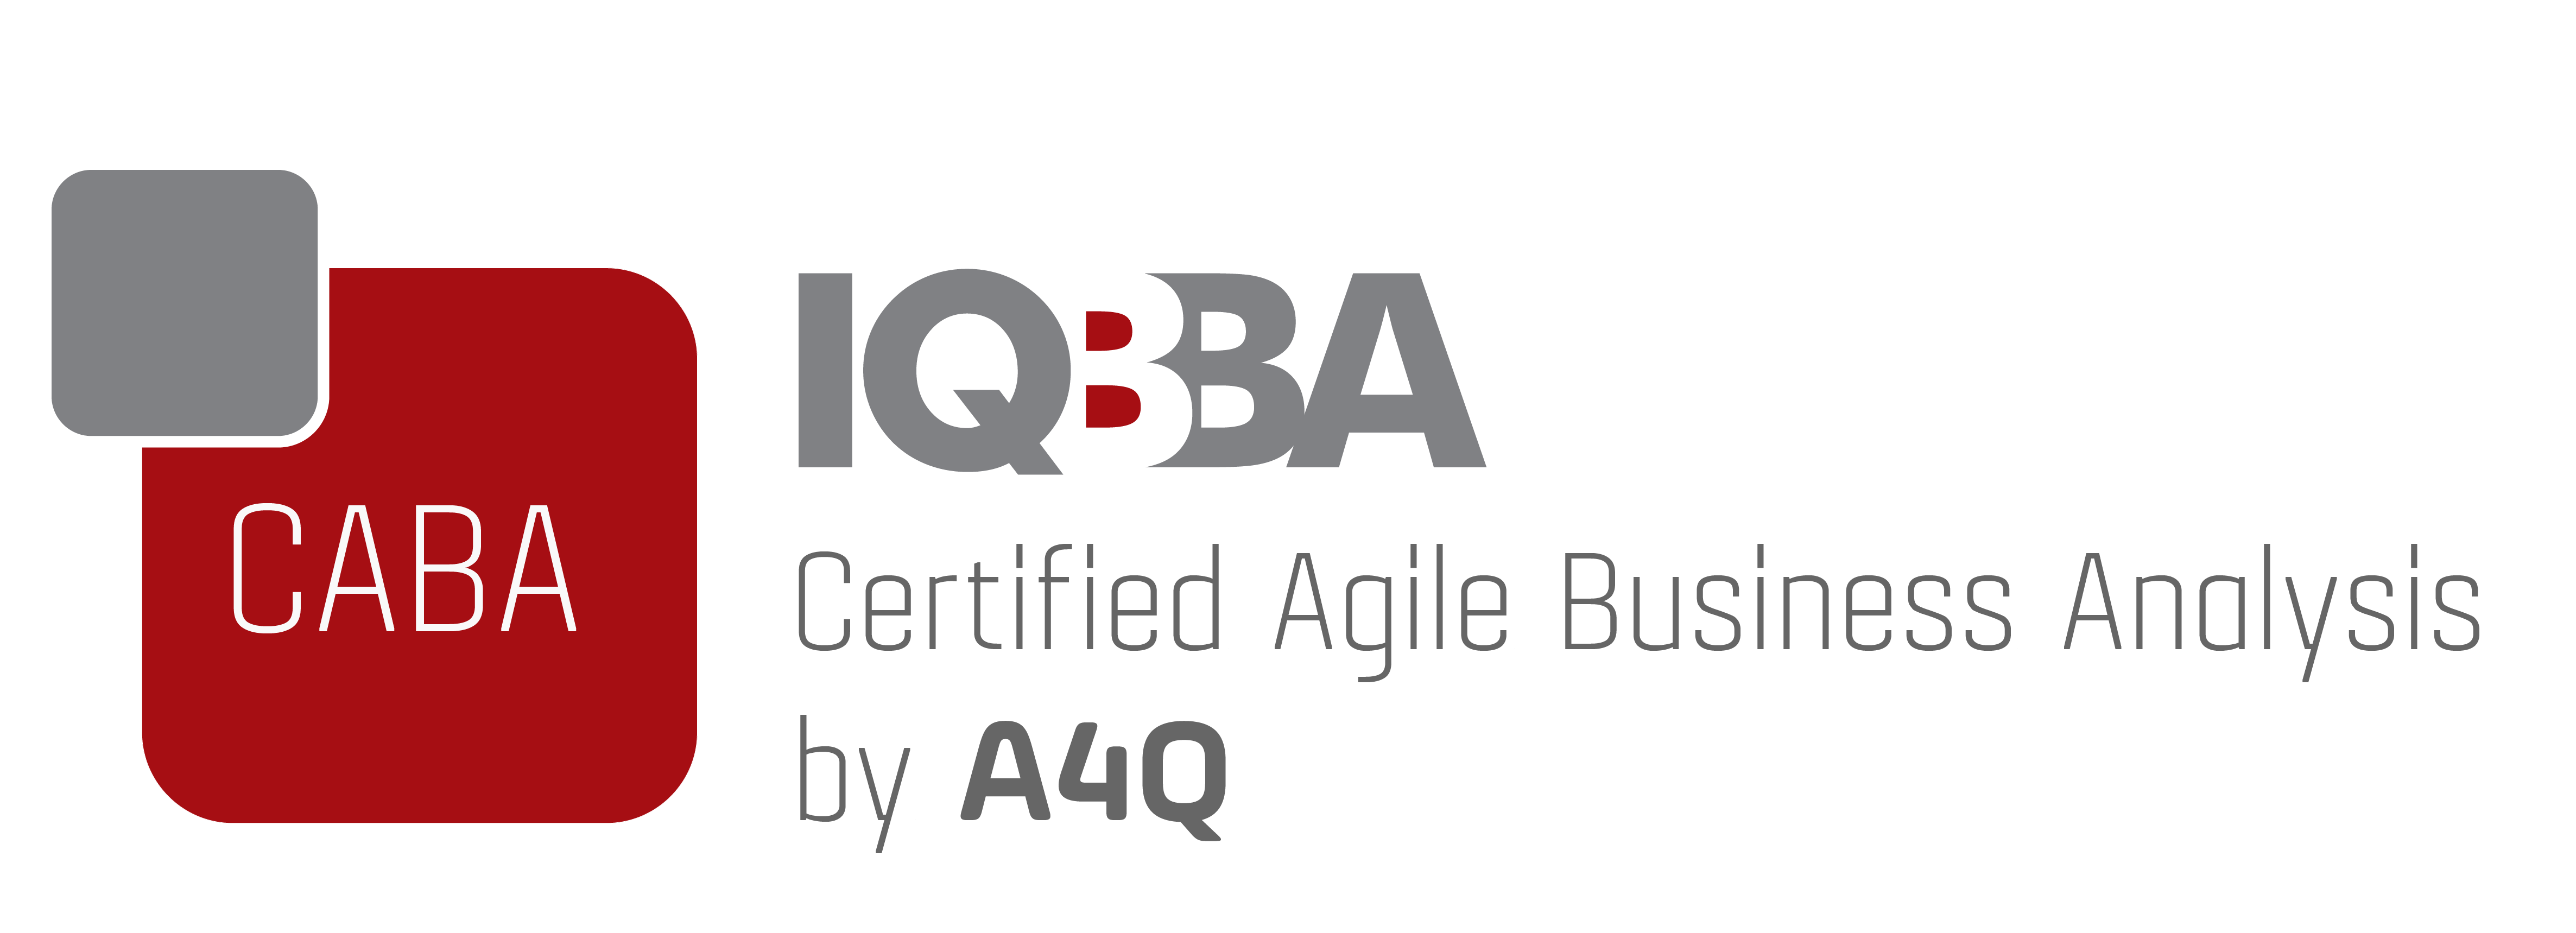 IQBBA Certified Agile Business Analyst